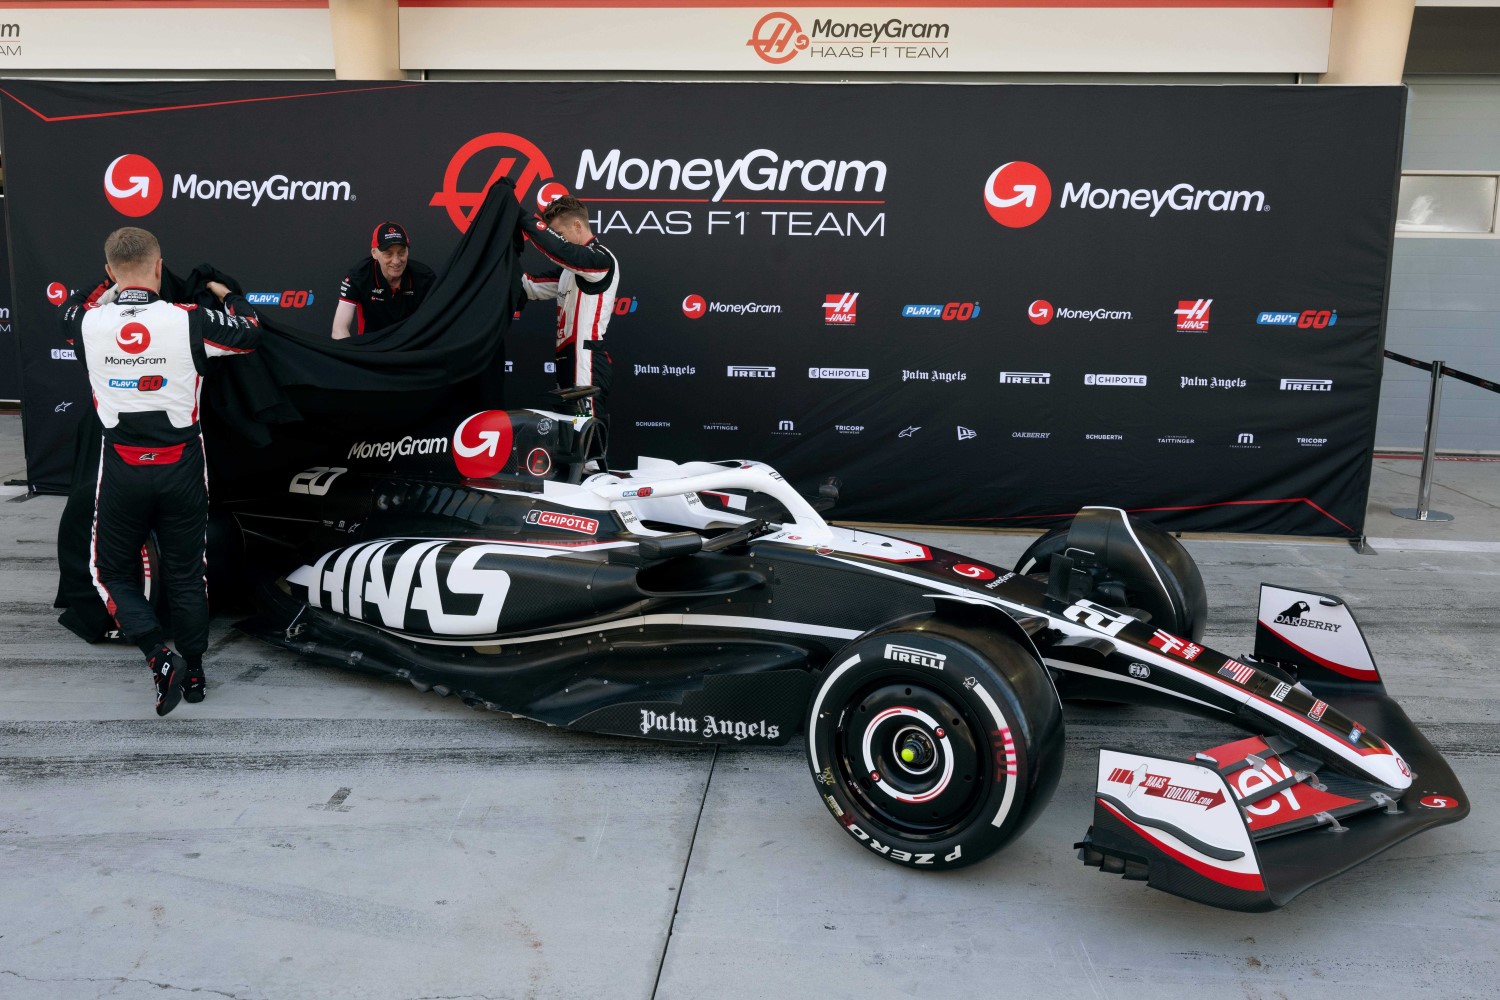 MoneyGram brought Danish fan, Karsten Pedersen, behind-the-scenes to the 2024 Formula One testing session to meet the team including team driver and fellow Dane, Kevin Magnussen. Karsten, a long-time MoneyGram Haas F1 Team fan and supporter of Magnussen for years, lives in Bahrain and previously worked for the Danish company that painted some of the track markings found on the Bahrain International Circuit.